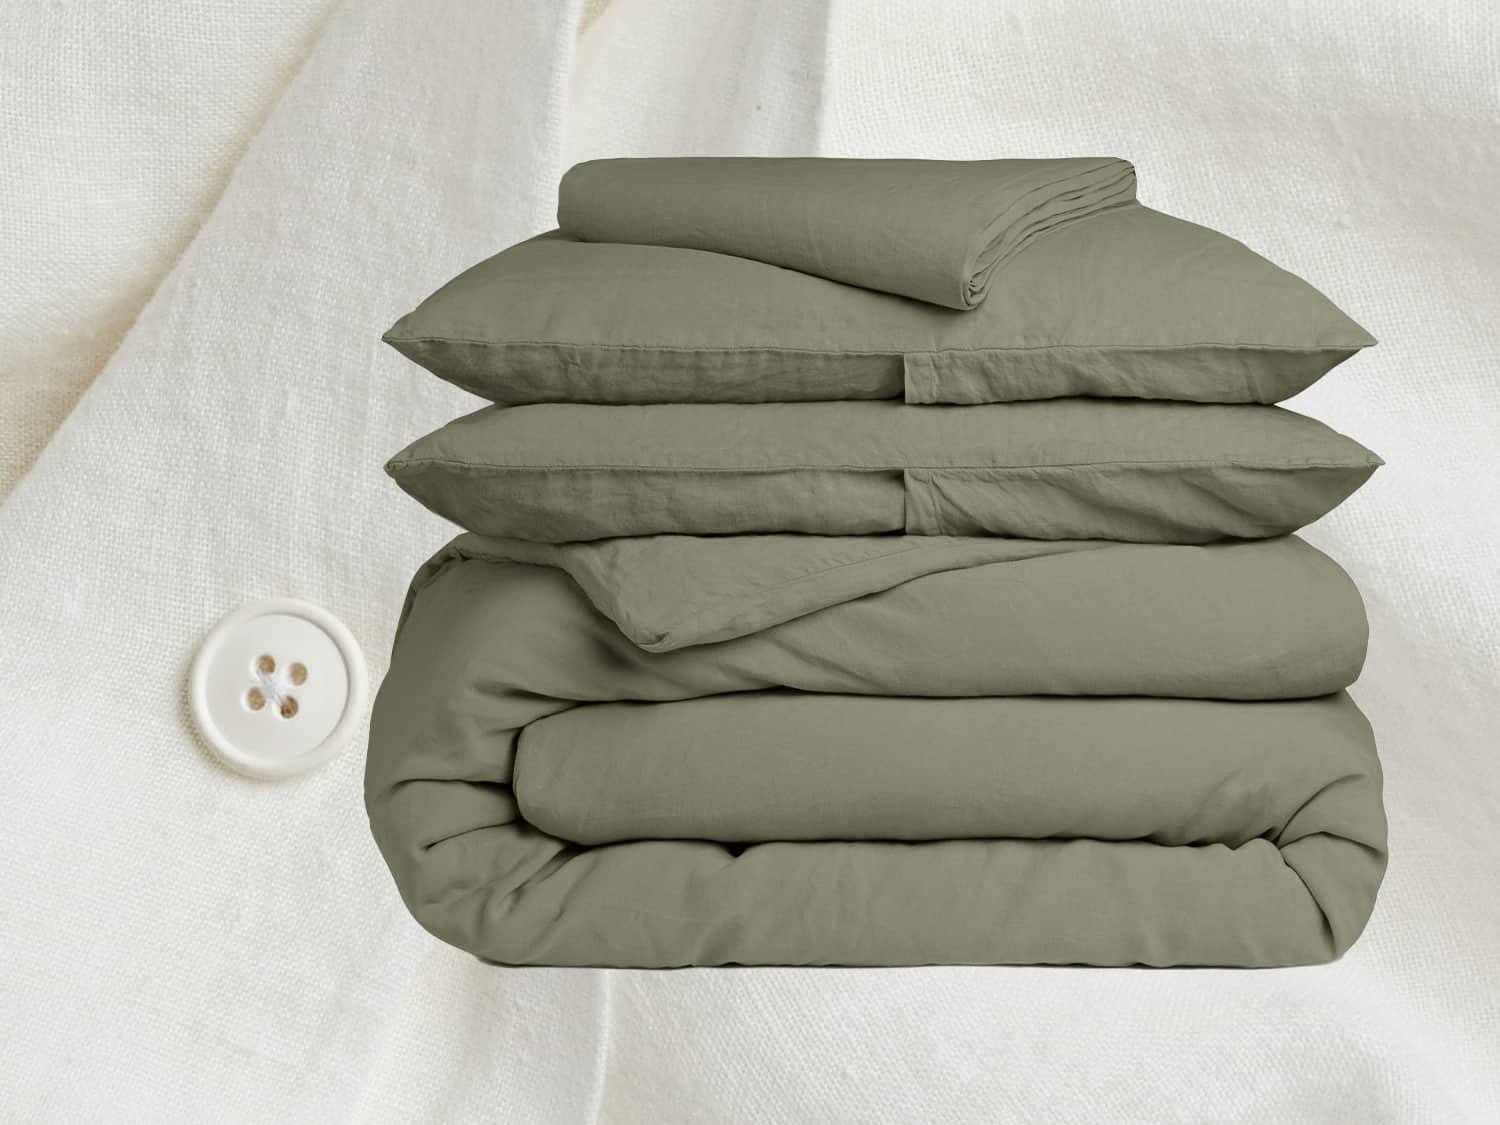 Parachute Moss and Cream Color linen sheets